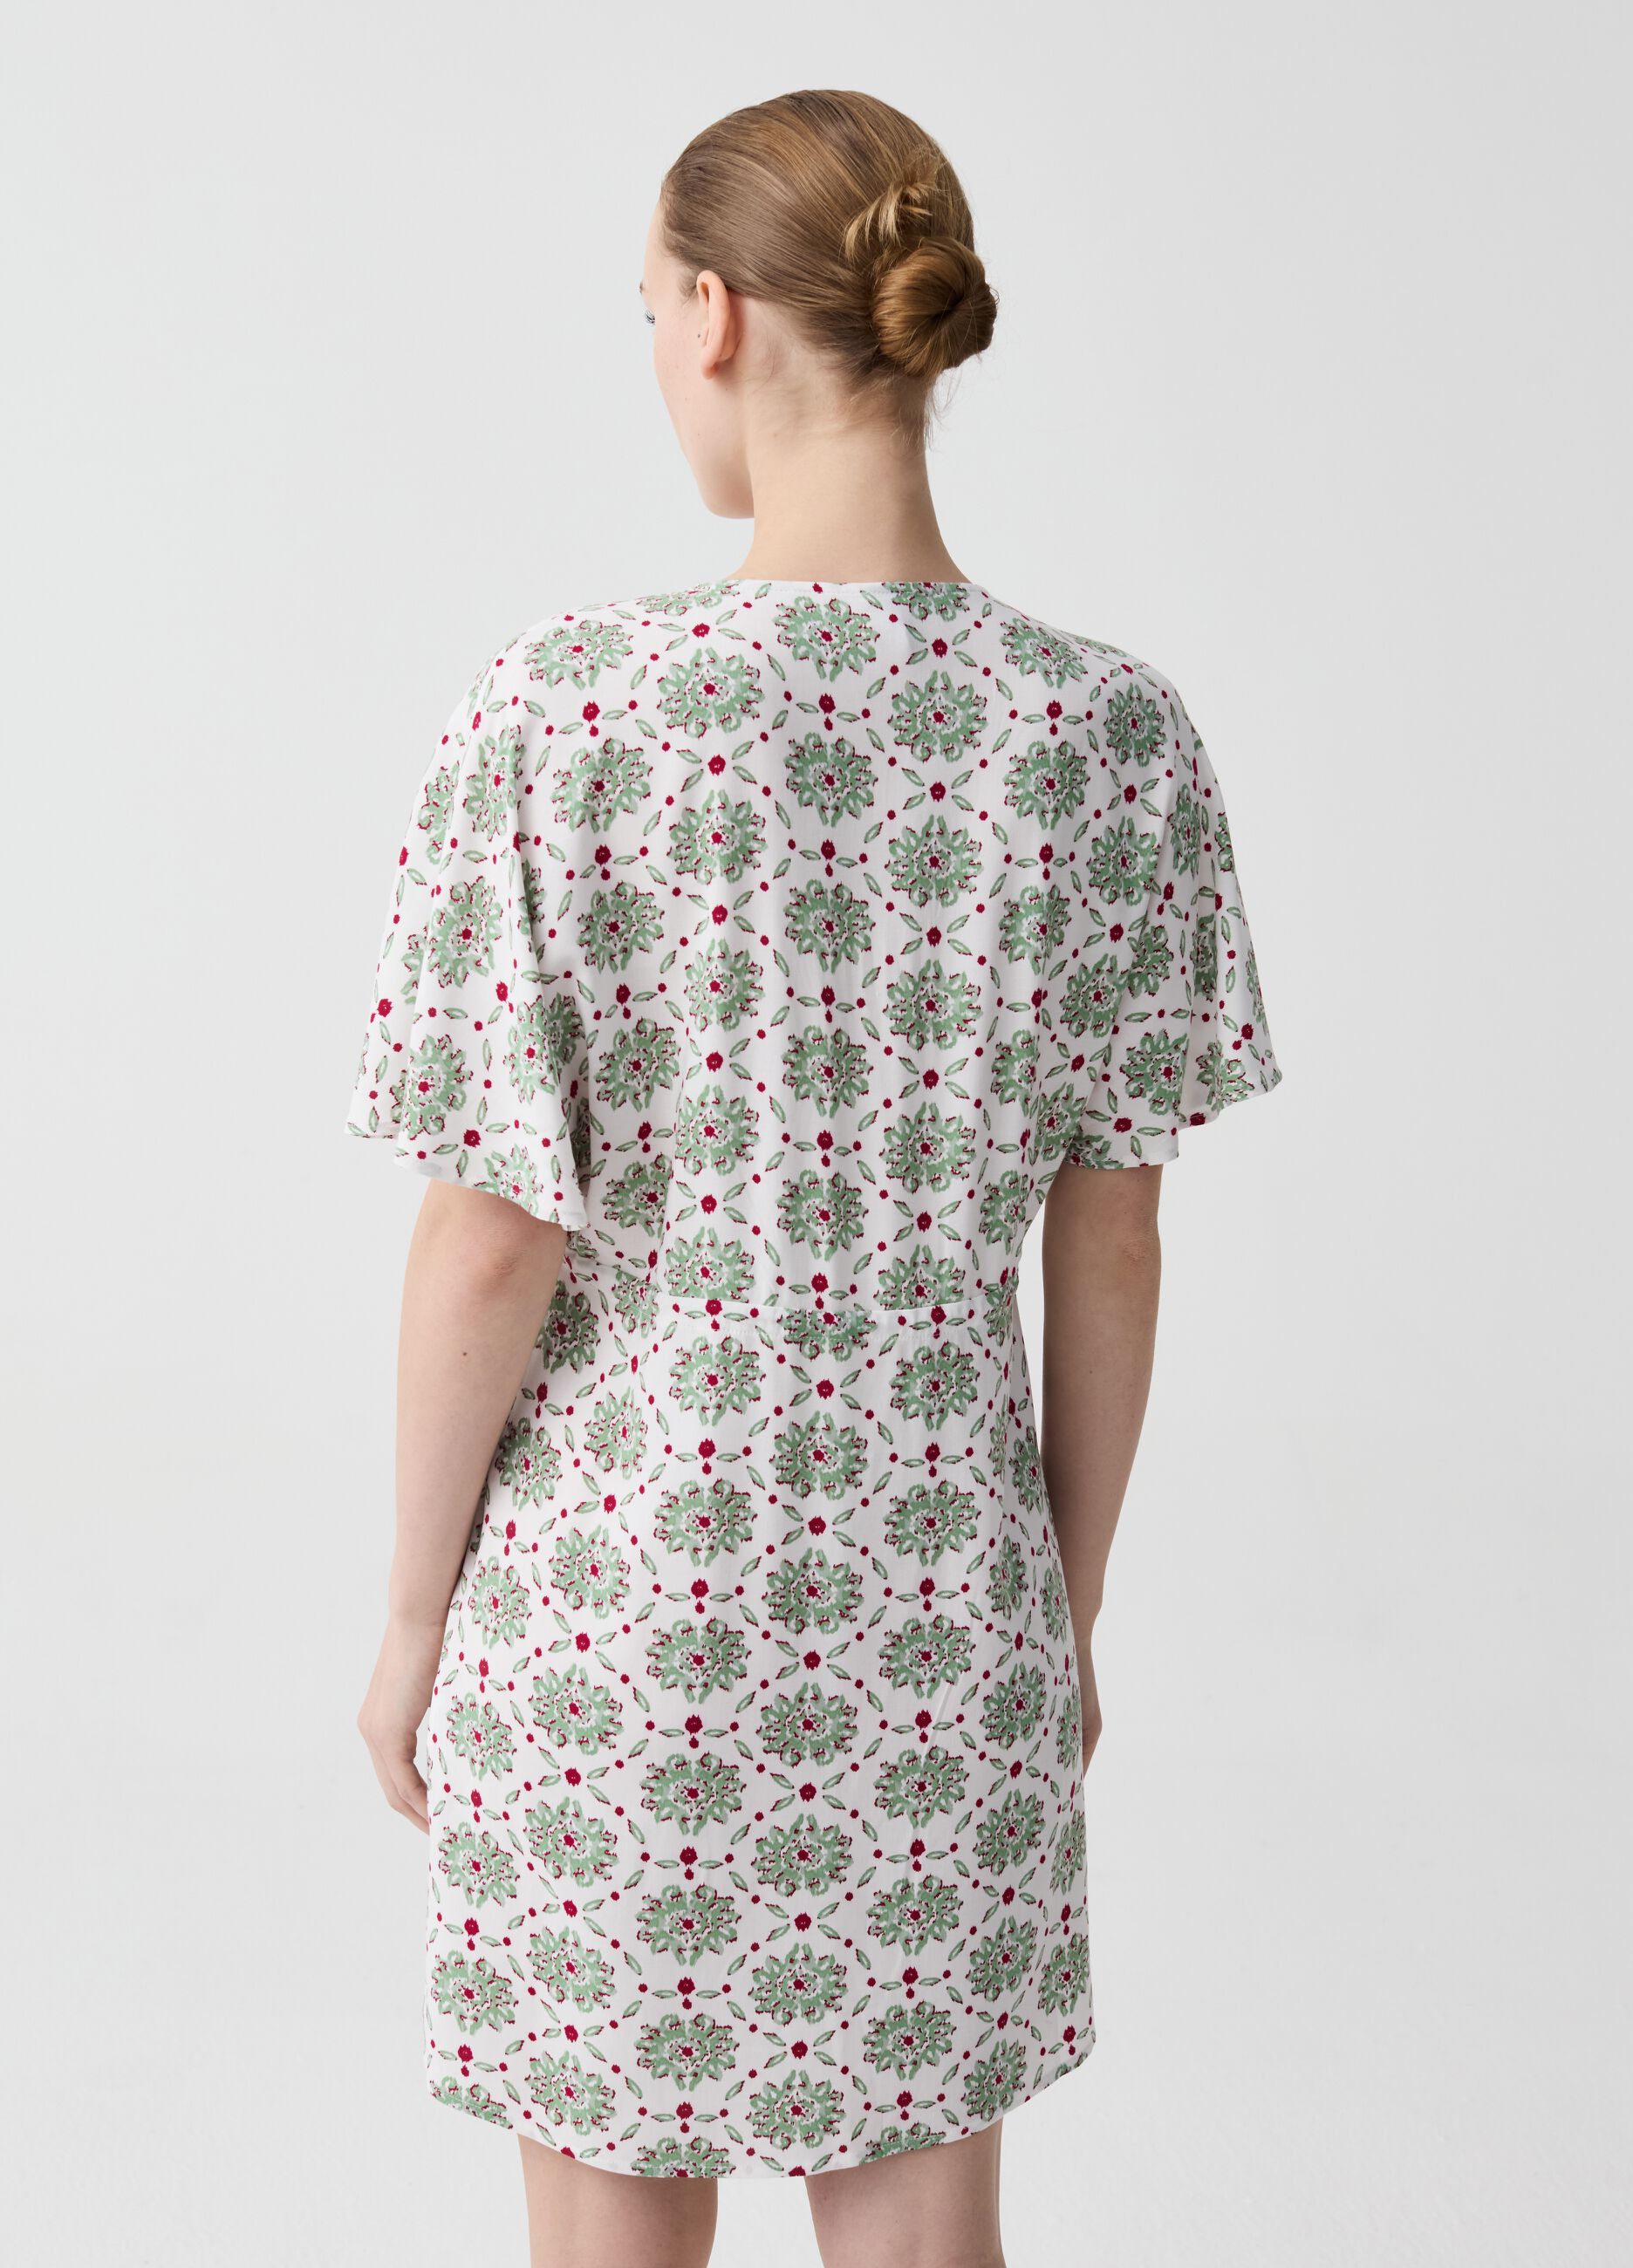 Floral nightdress with drawstring